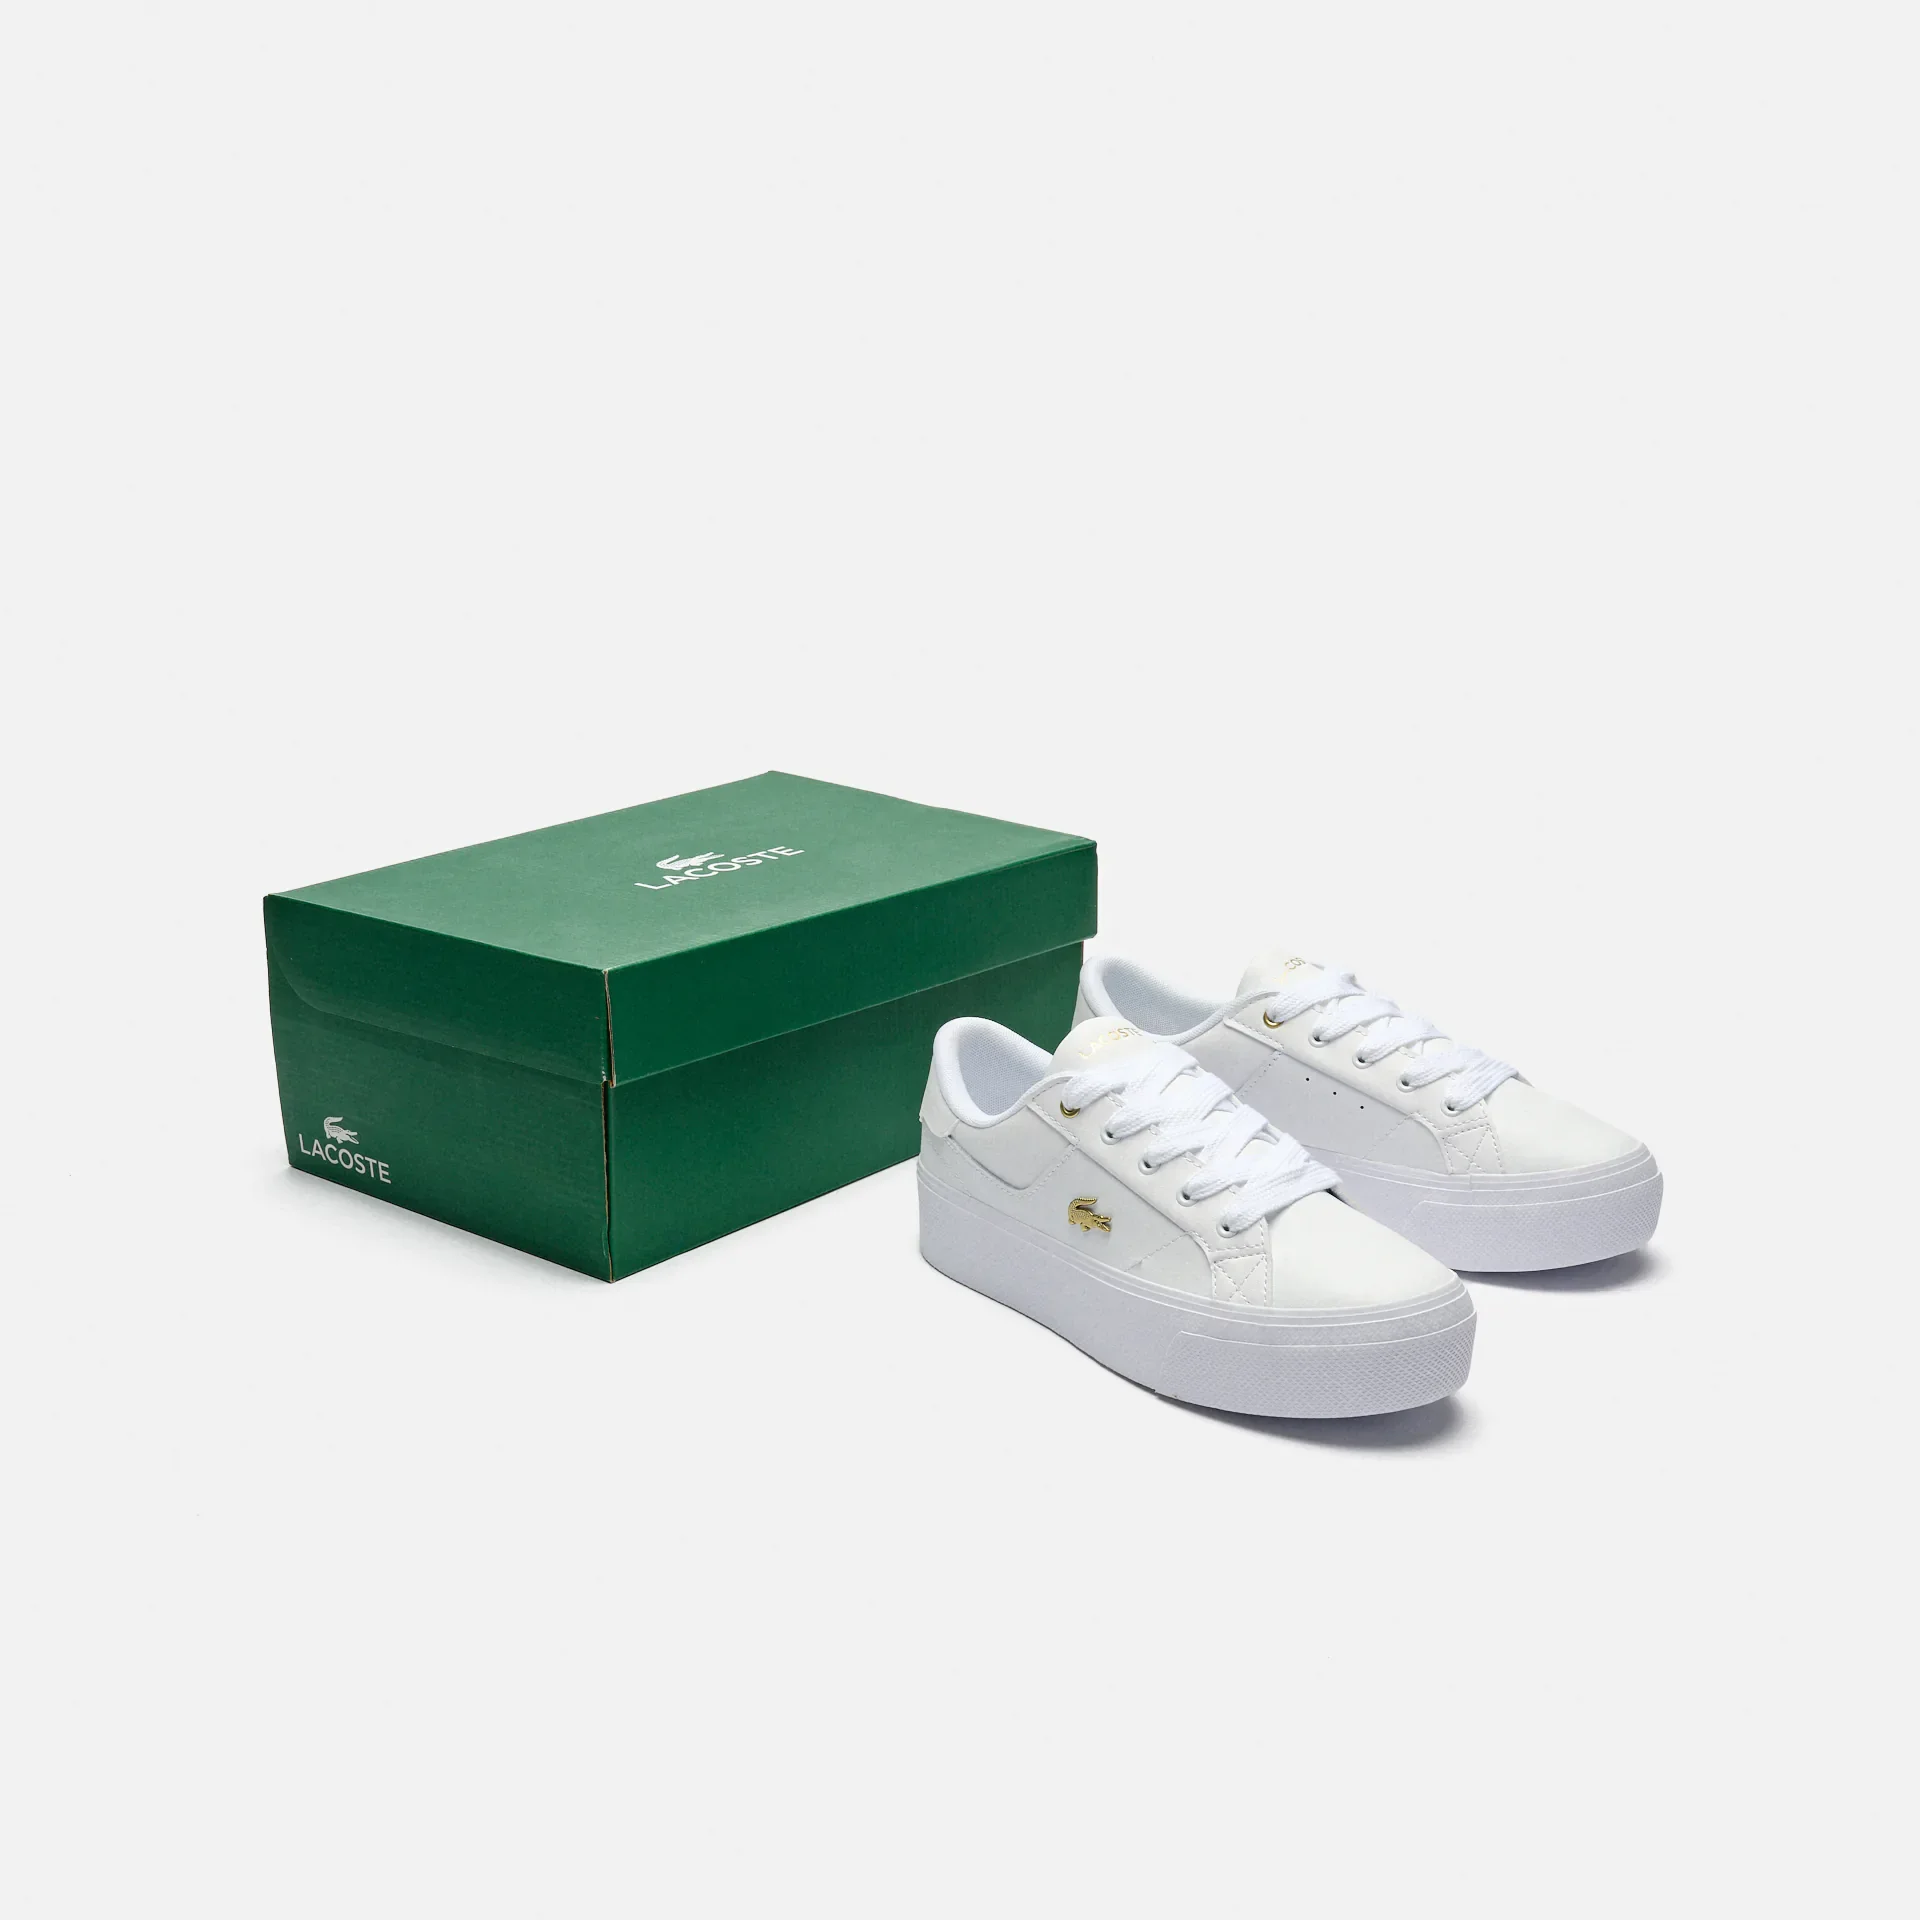 Lacoste Ziane Platform Leather Sneakers White/Gold